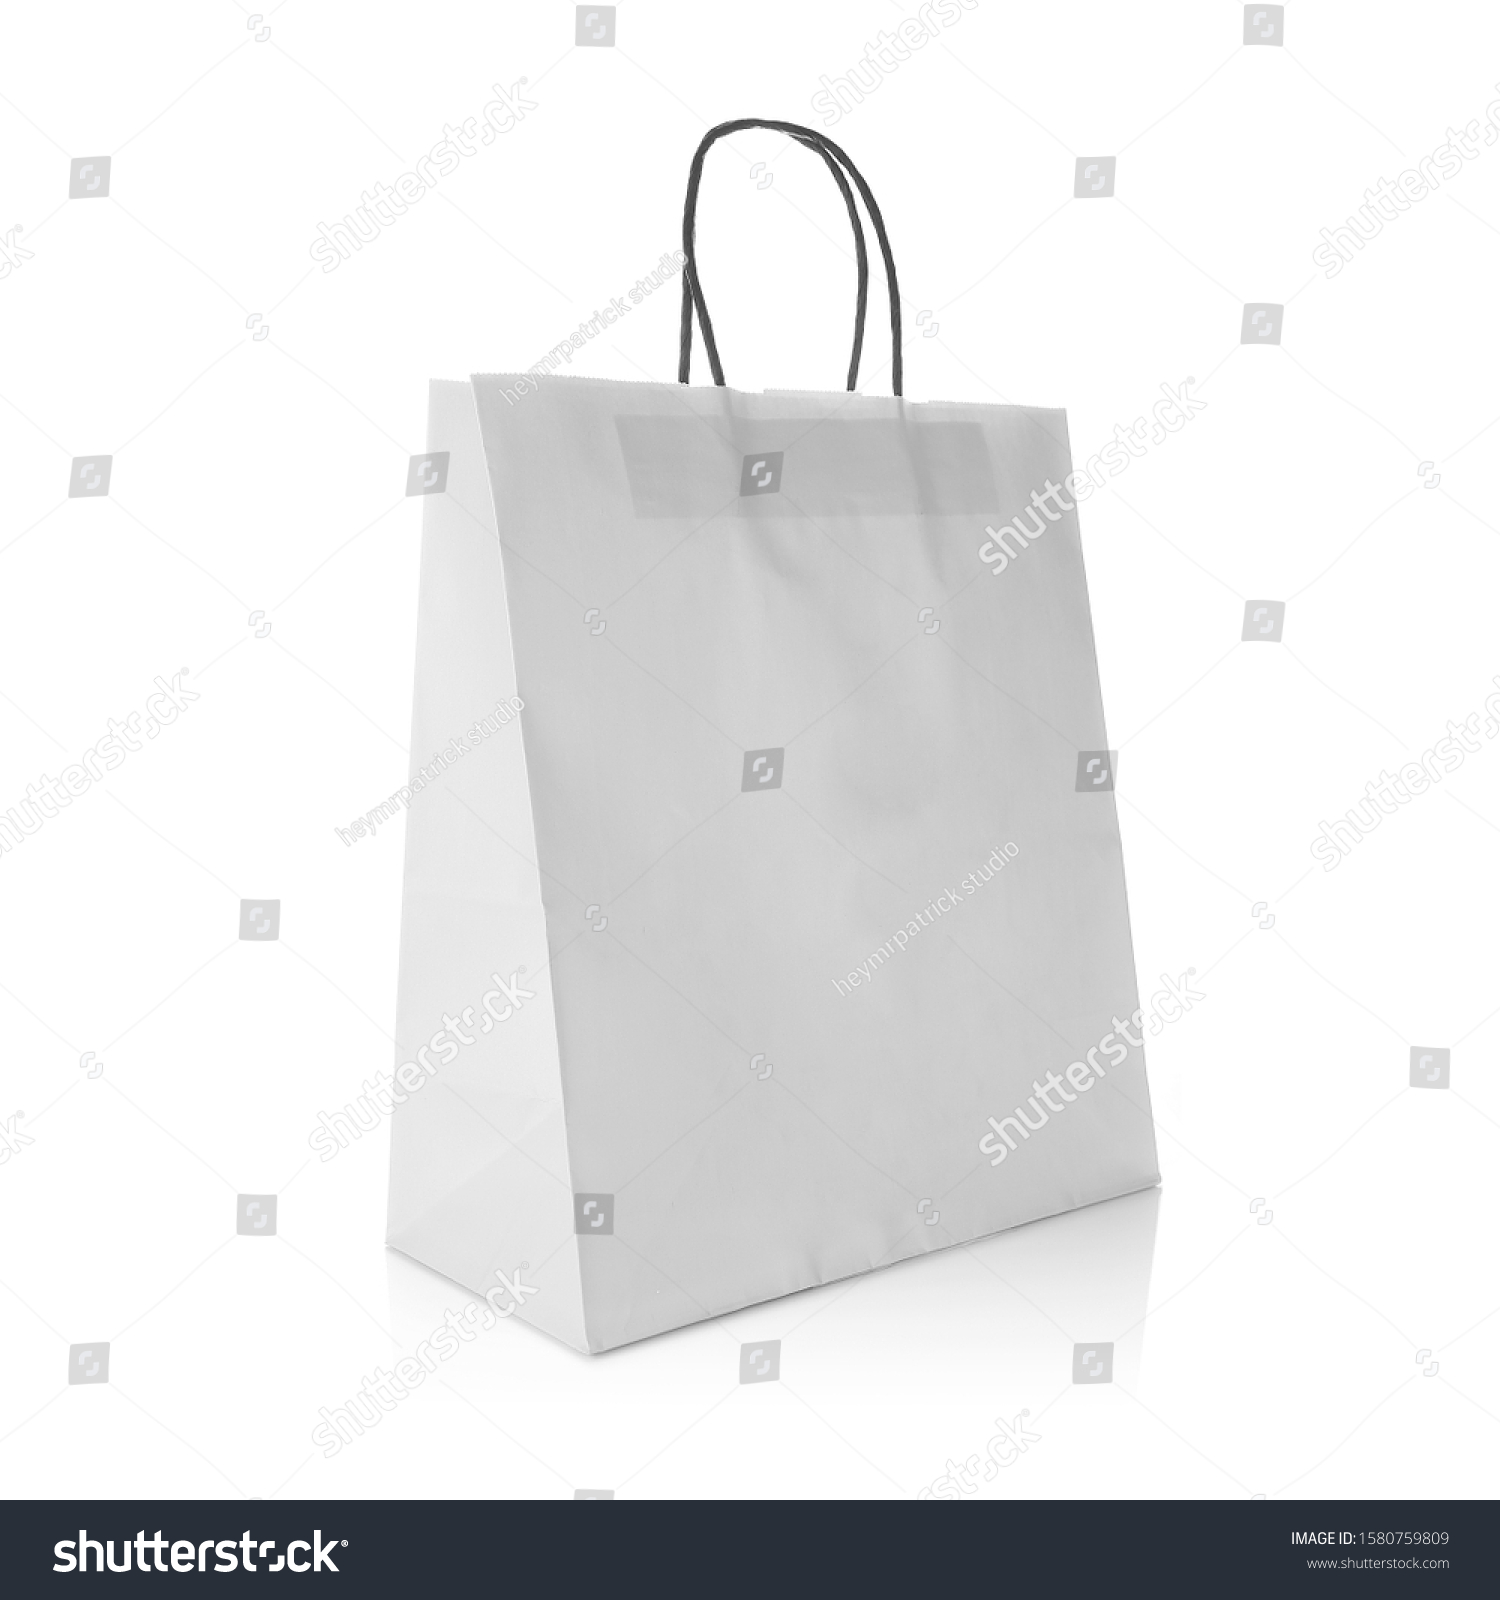 White kraft paper gift bag with handle for easy carry. Cut out on white background. Eco friendly & reusable shopping bag for groceries, gifts, goodies. Design template for Mock up, Branding, Advertise #1580759809